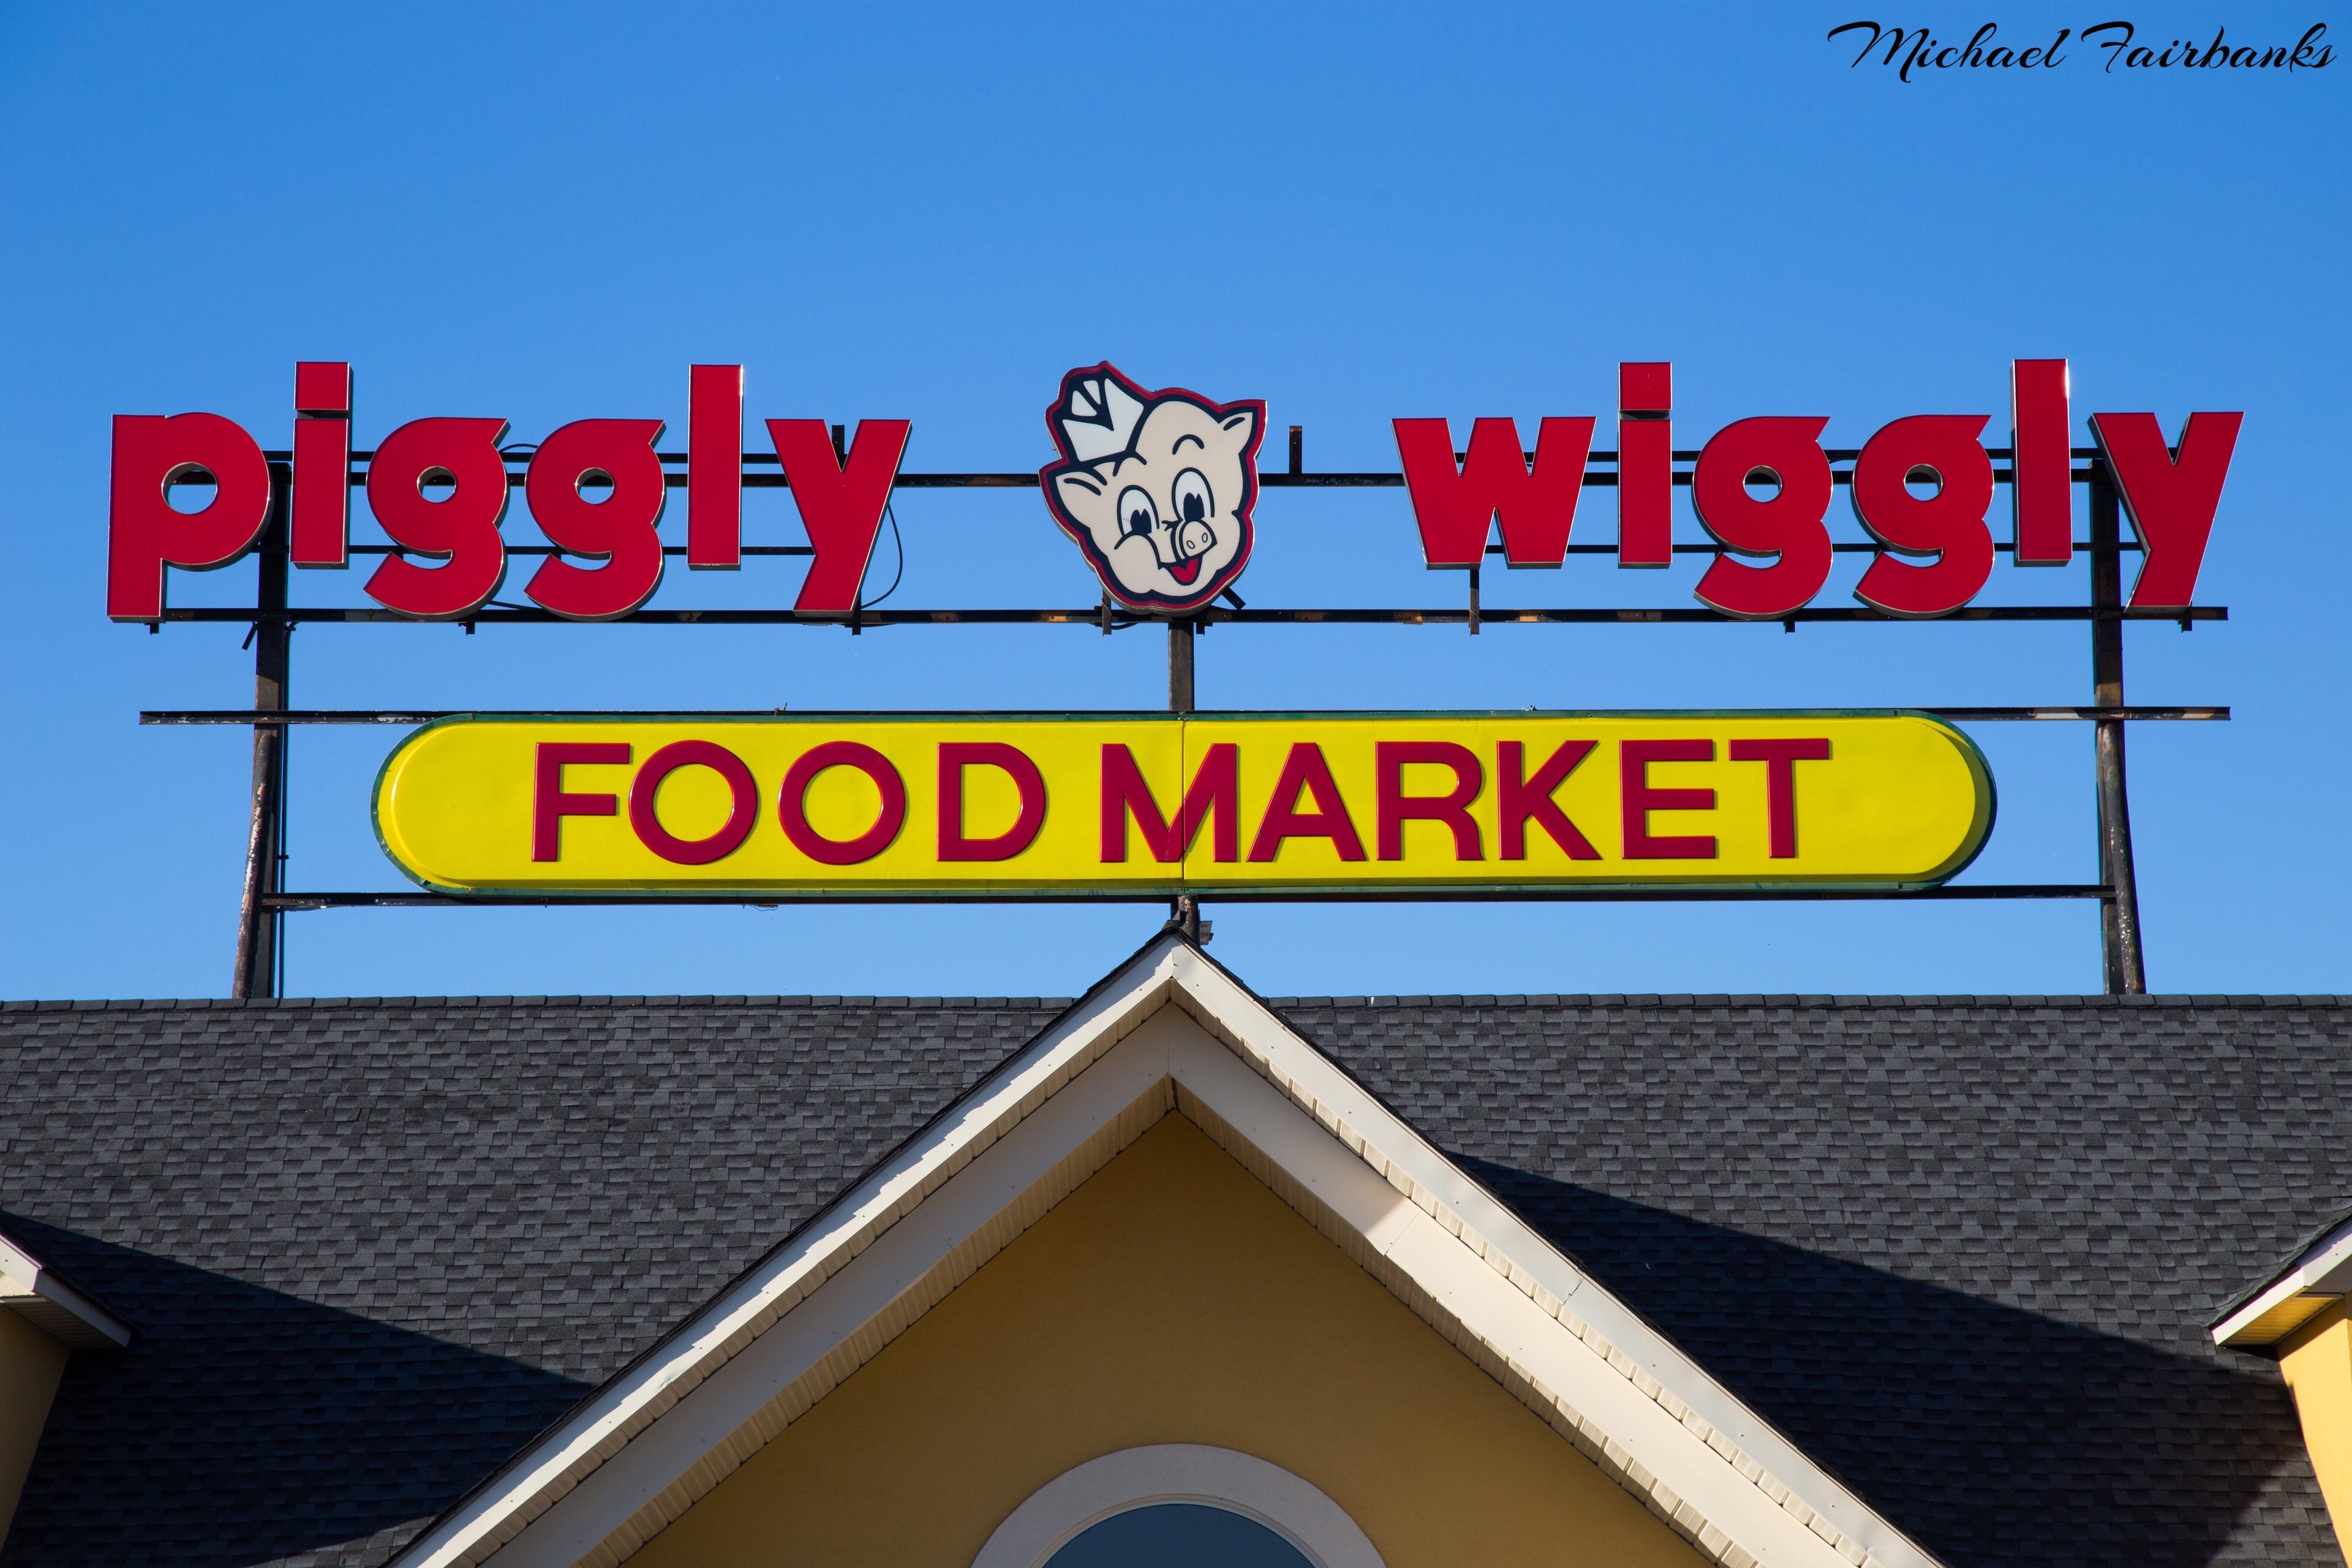 The Piggly Wiggly One.stl 3d model